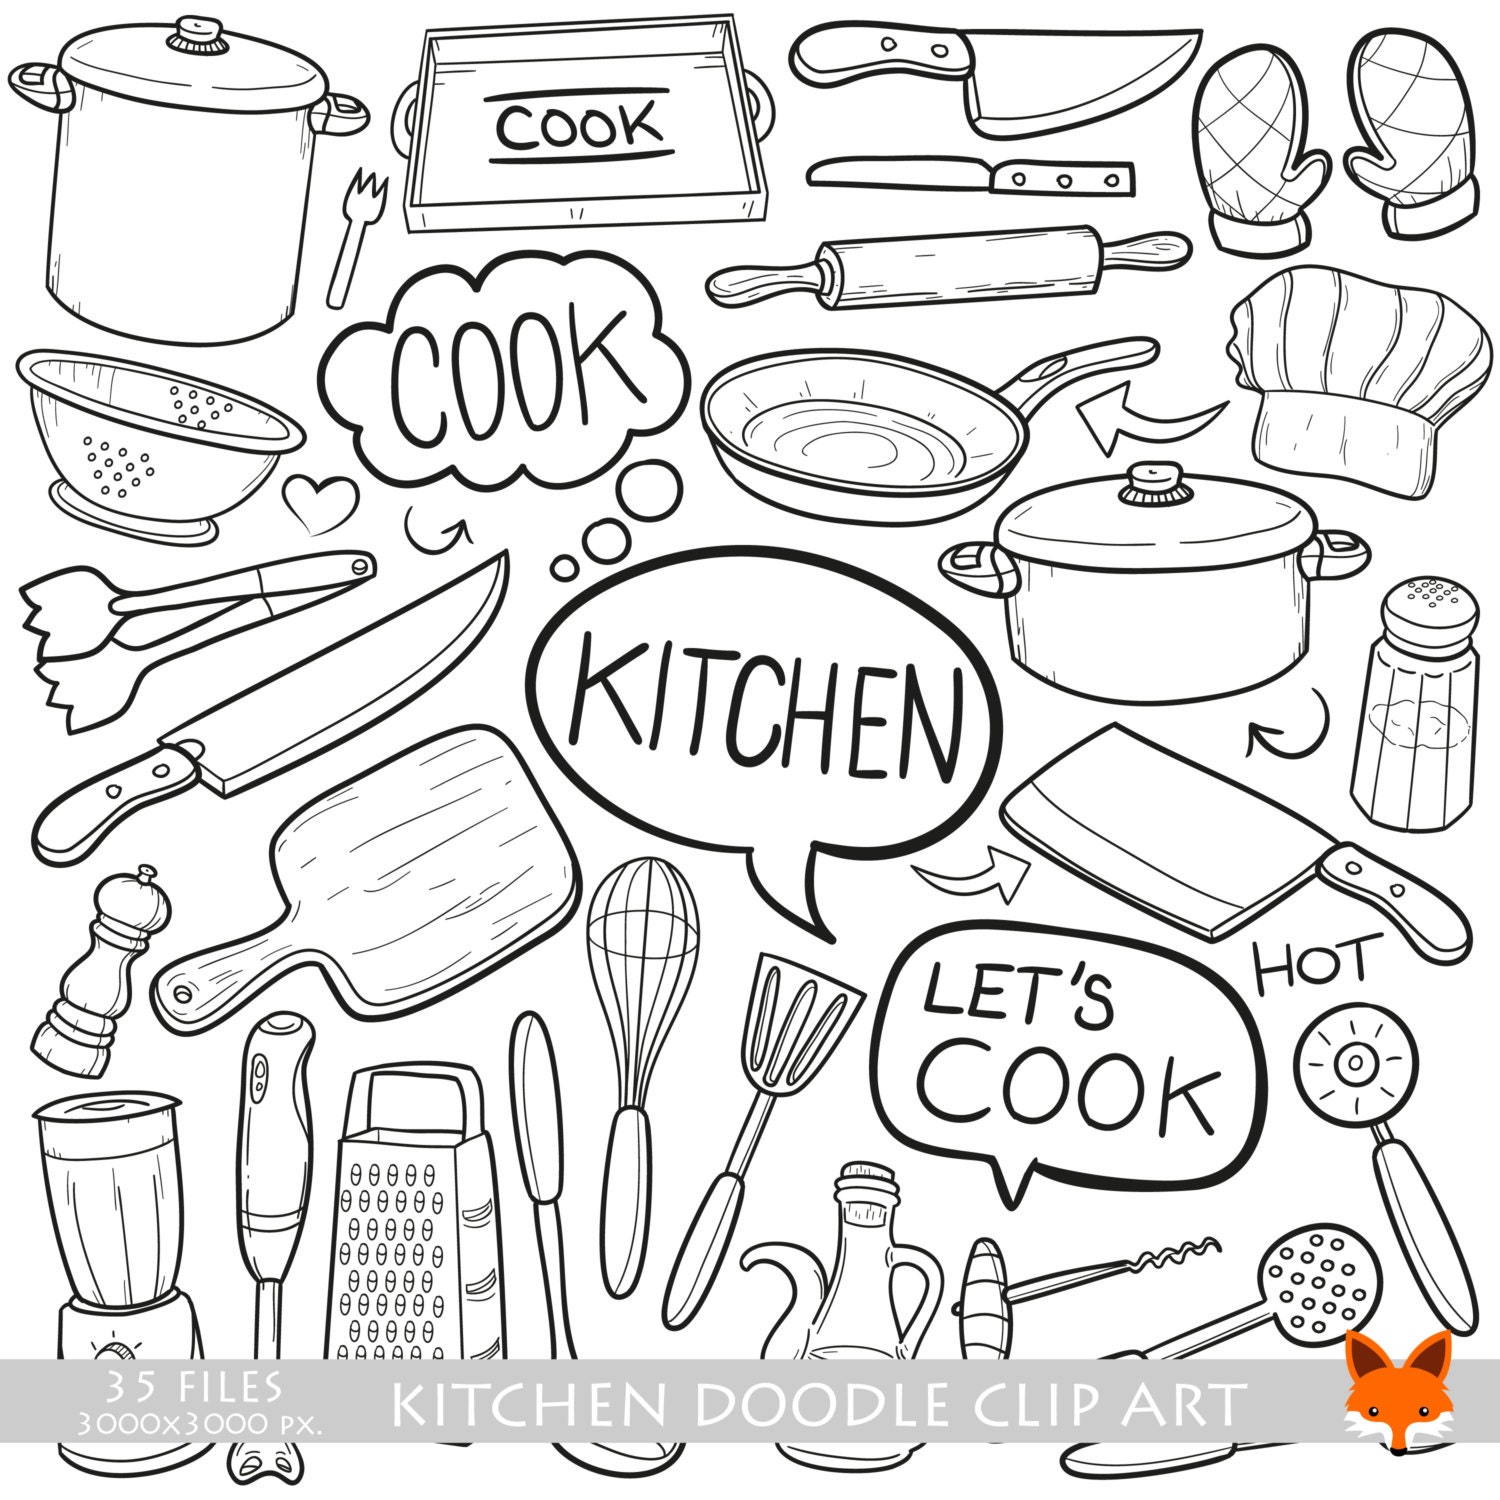 KITCHEN TOOLS COOKING Items Of Home And House Objects Etsy